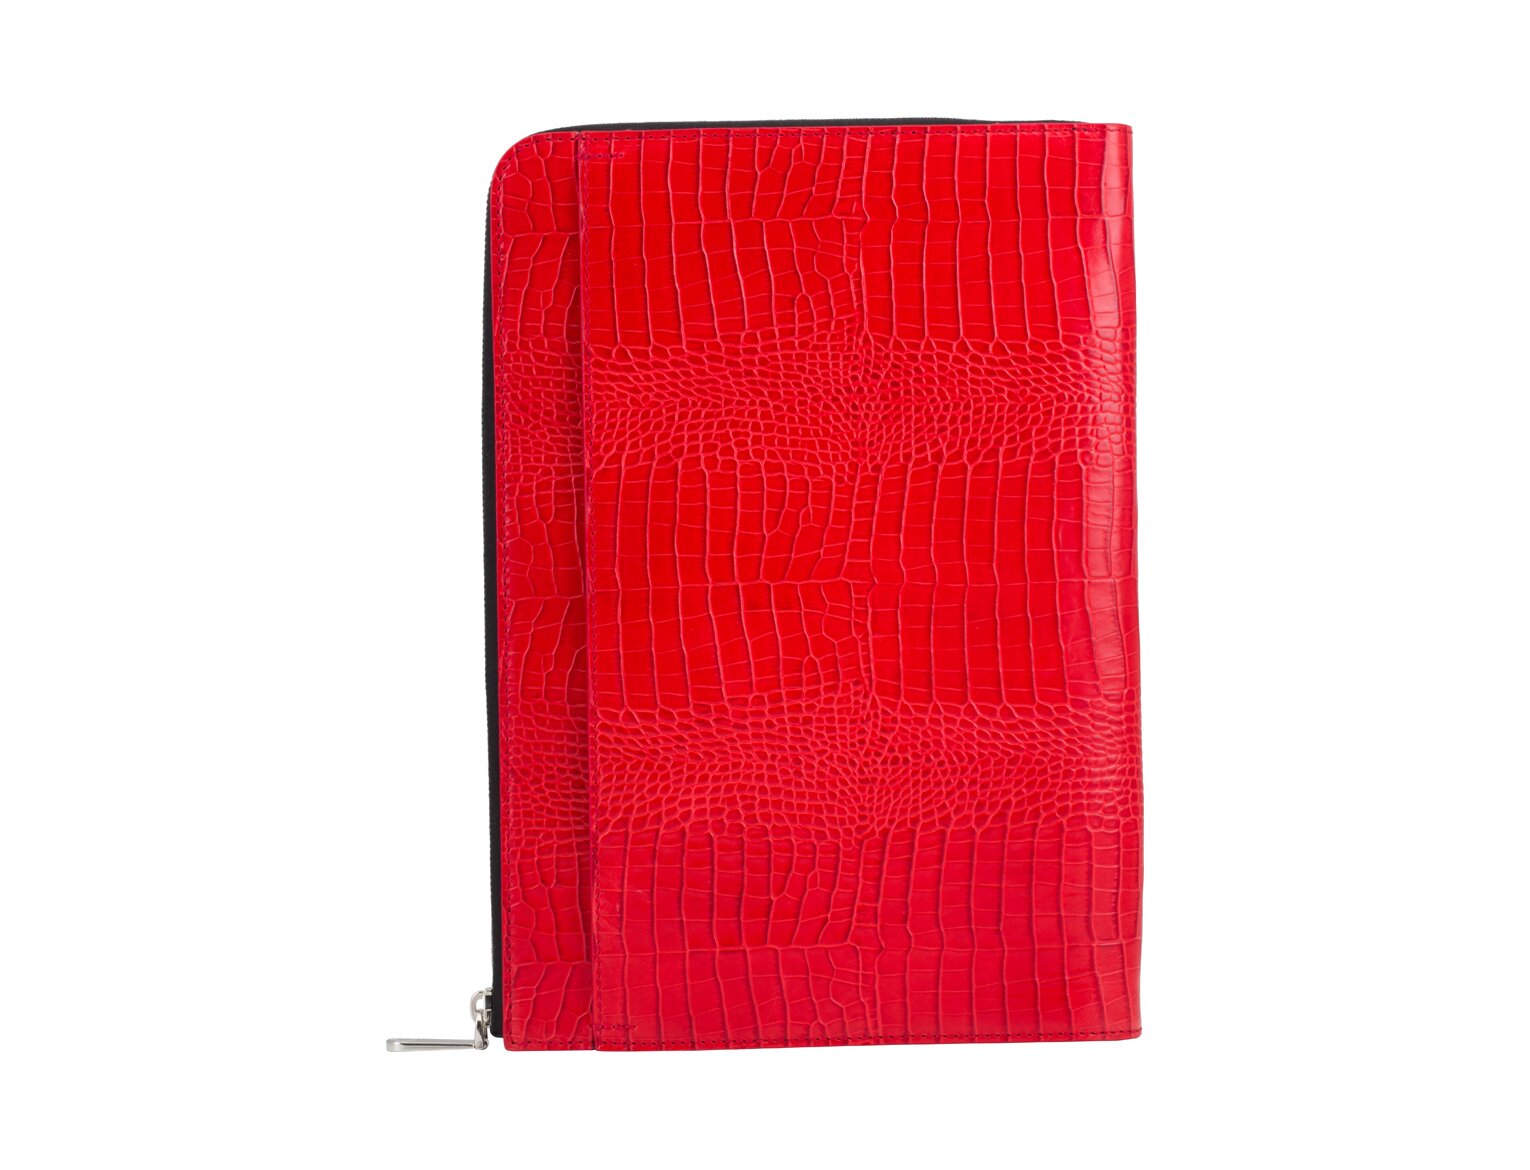 SNAKE-EFFECT RED LEATHER FOLIO